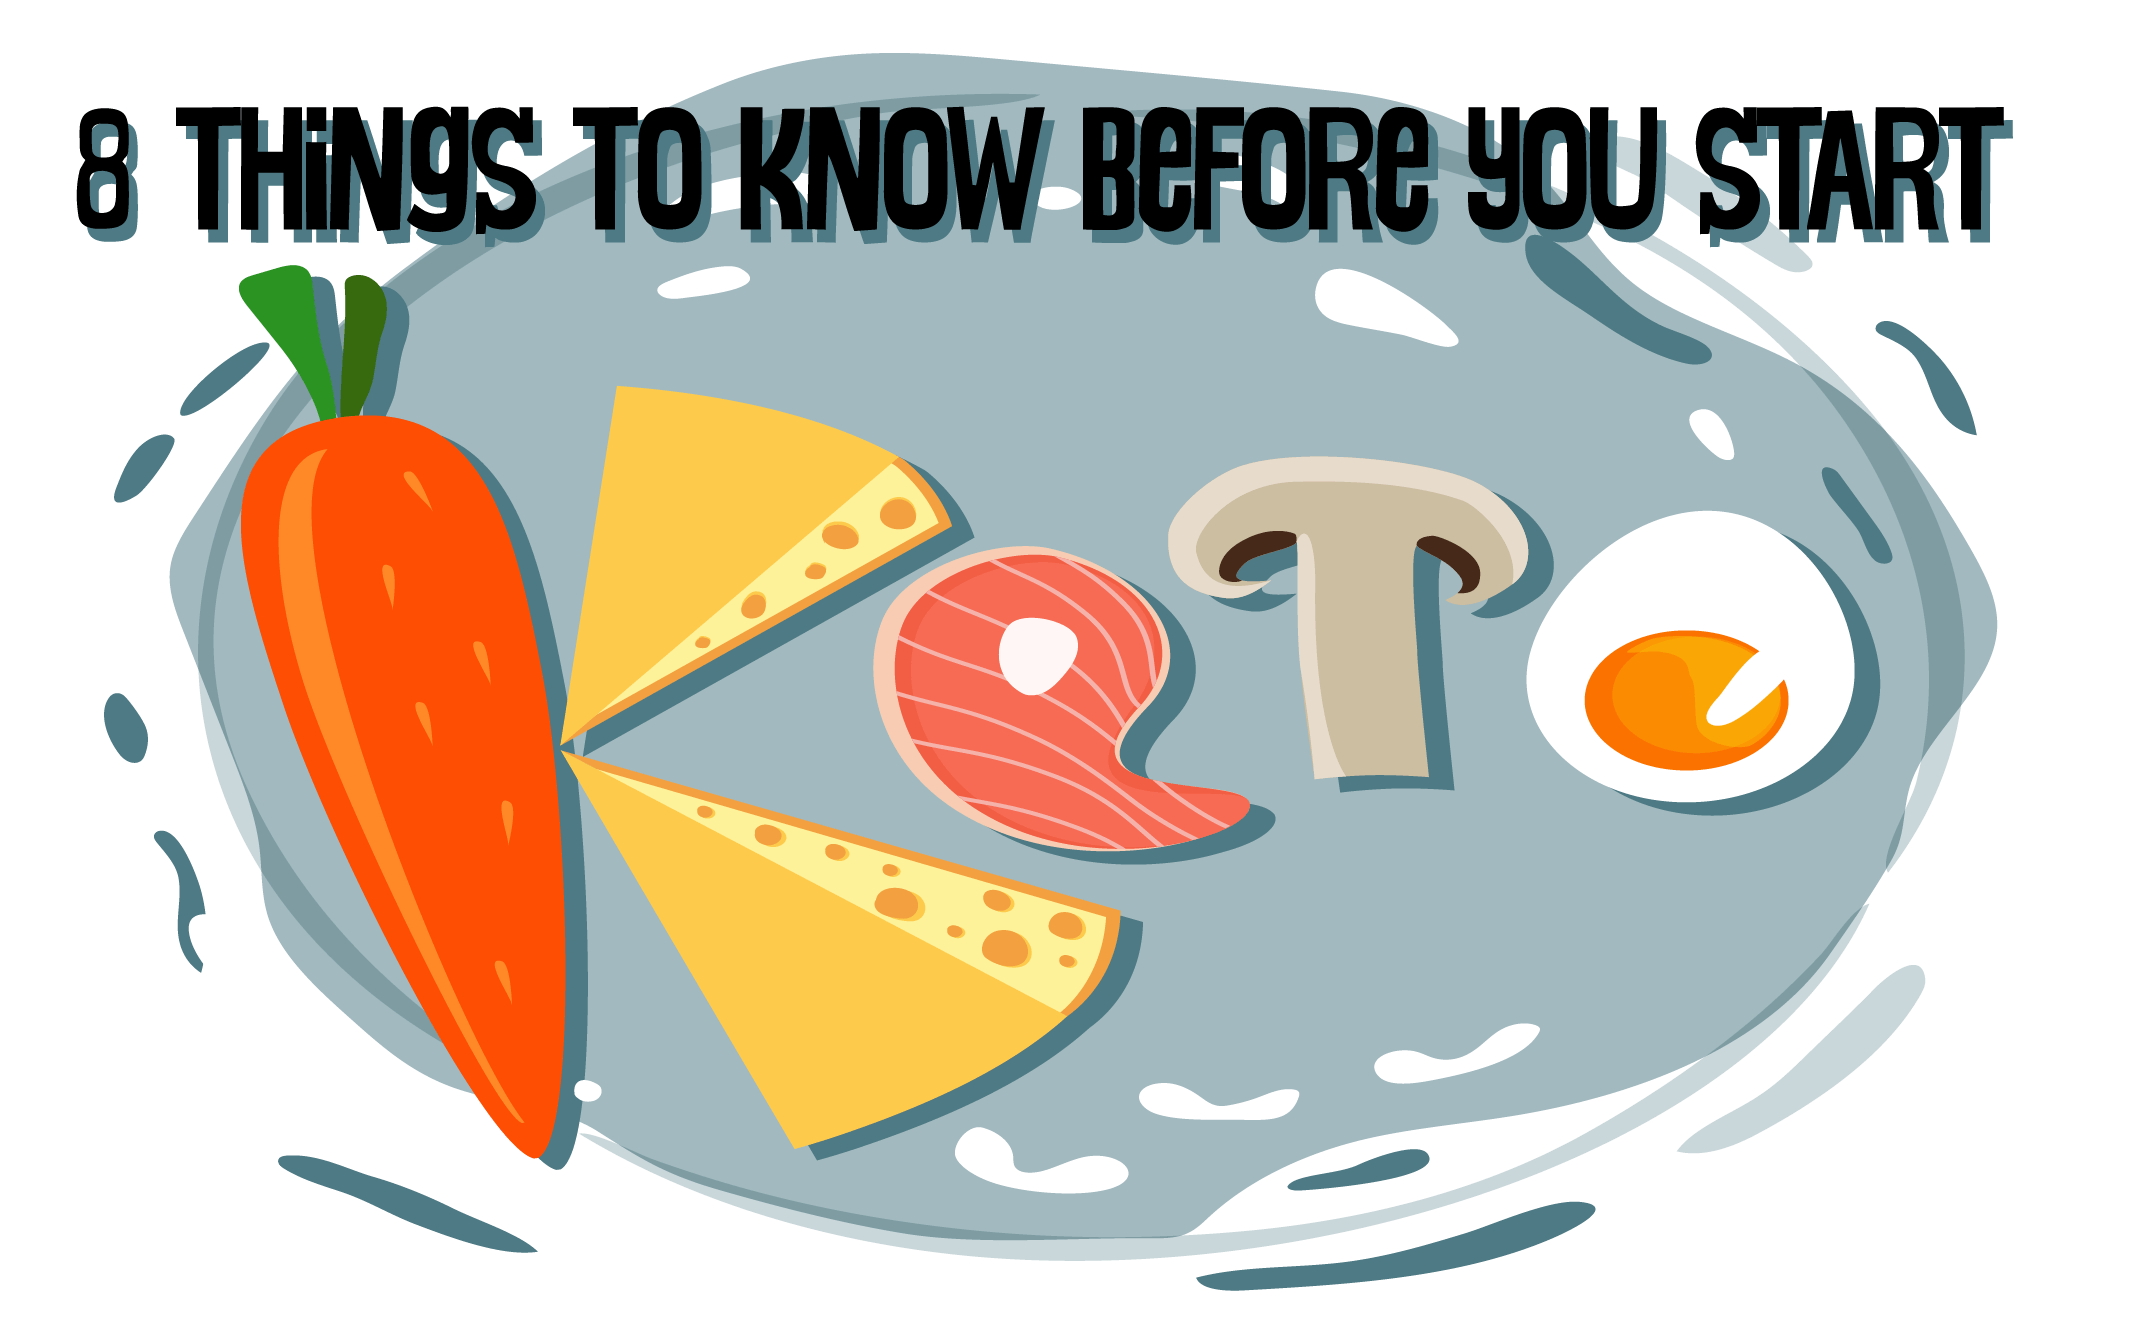 8 Things You should know before starting keto_Amy Berger blog post